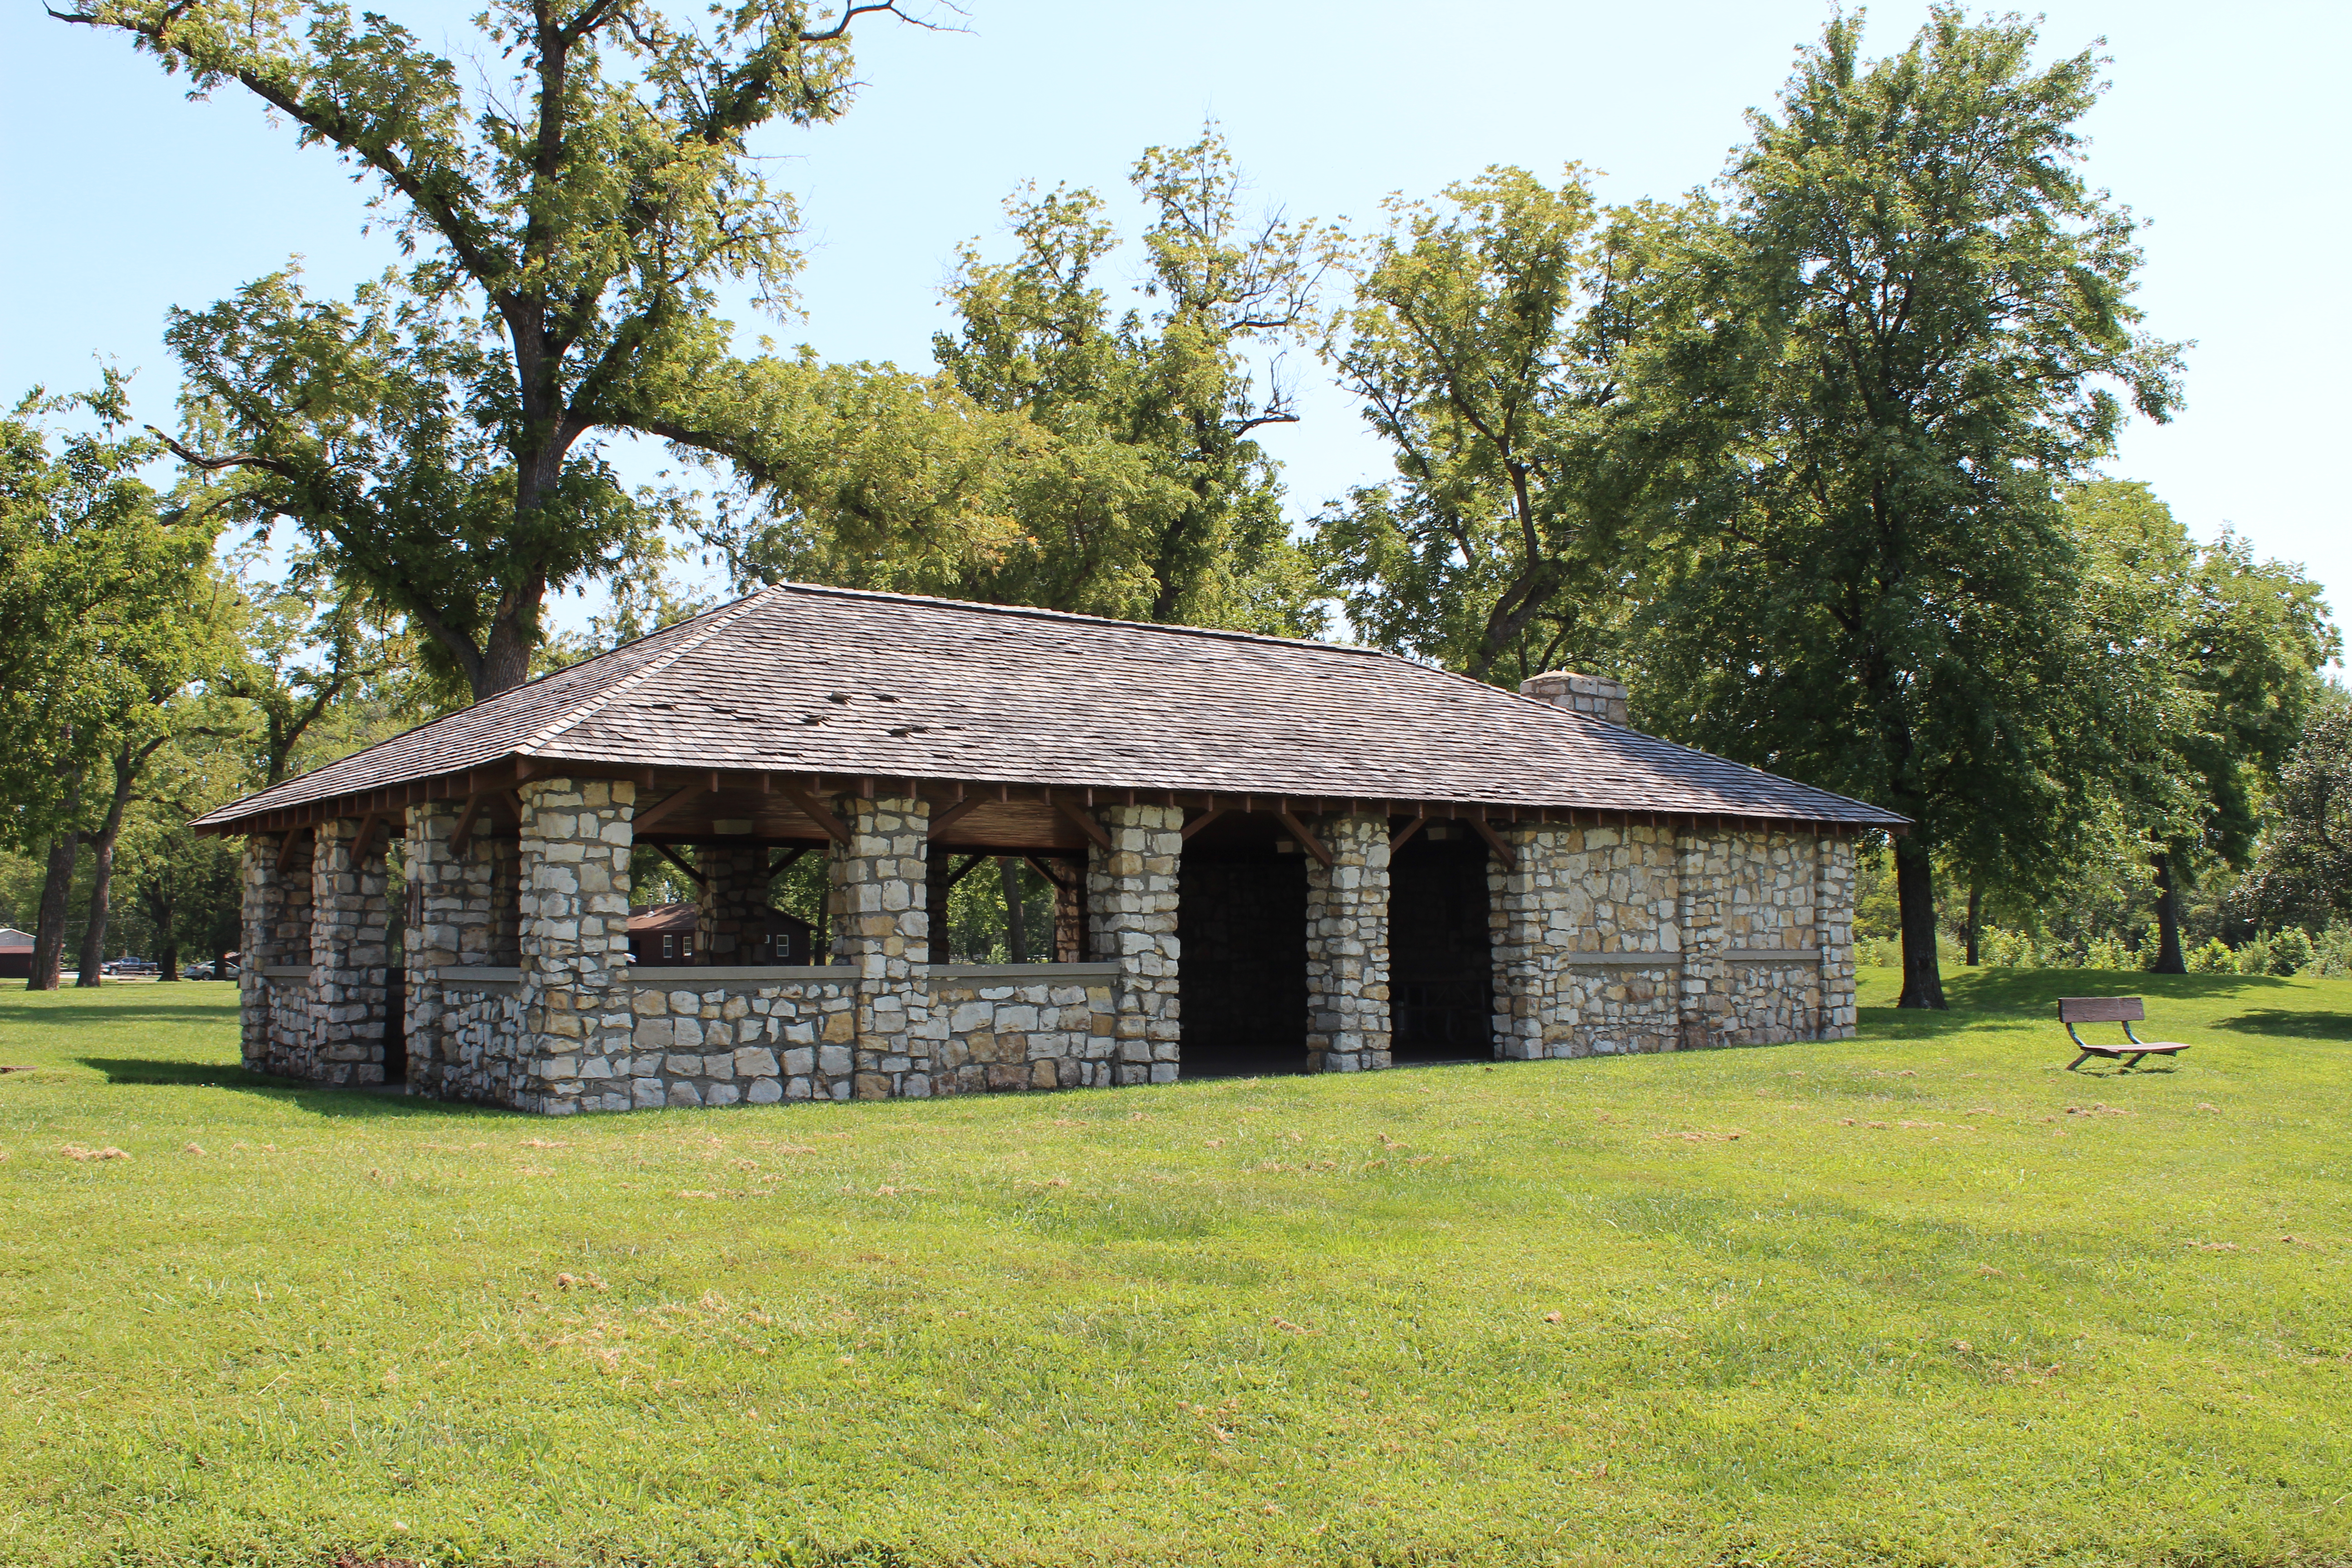 Stone picnic shelter with open windows and doorways situated in field under trees